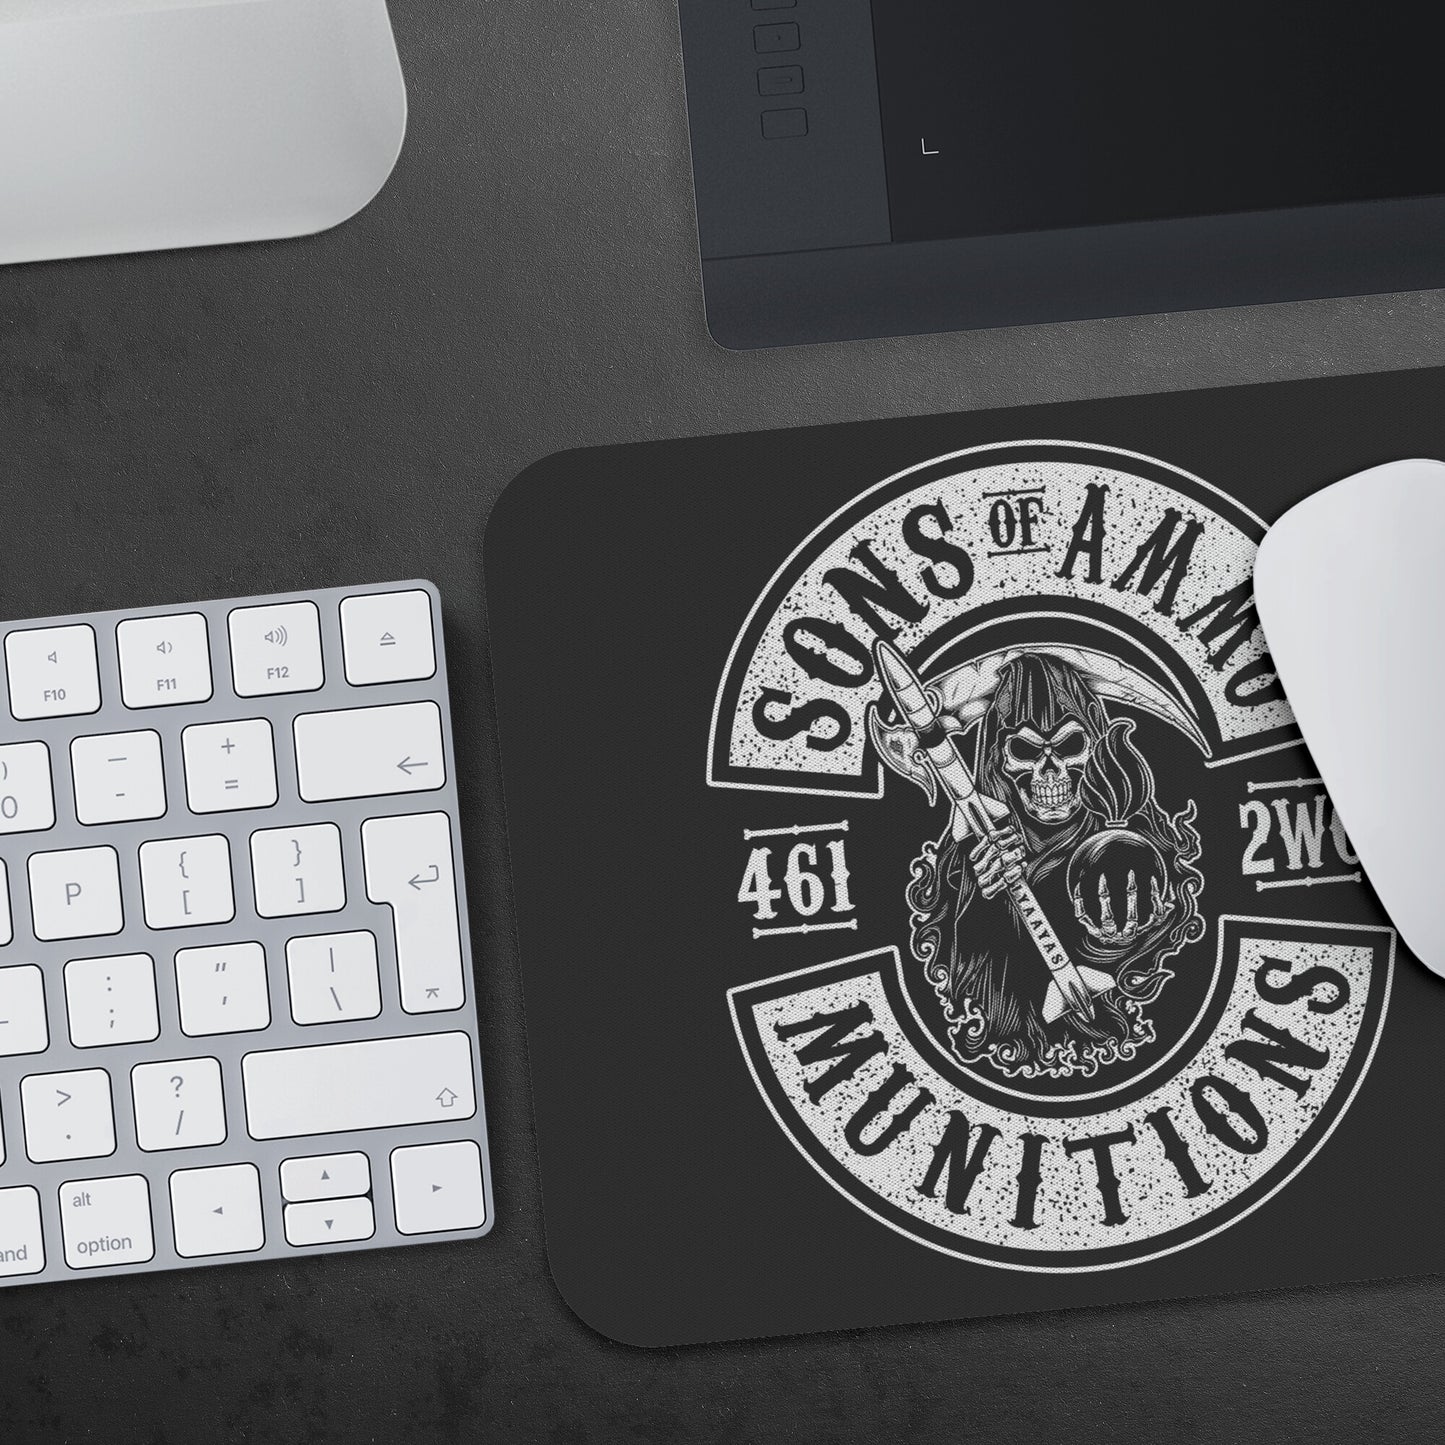 Sons of AMMO Grim Reaper Oval Logo Mousepad